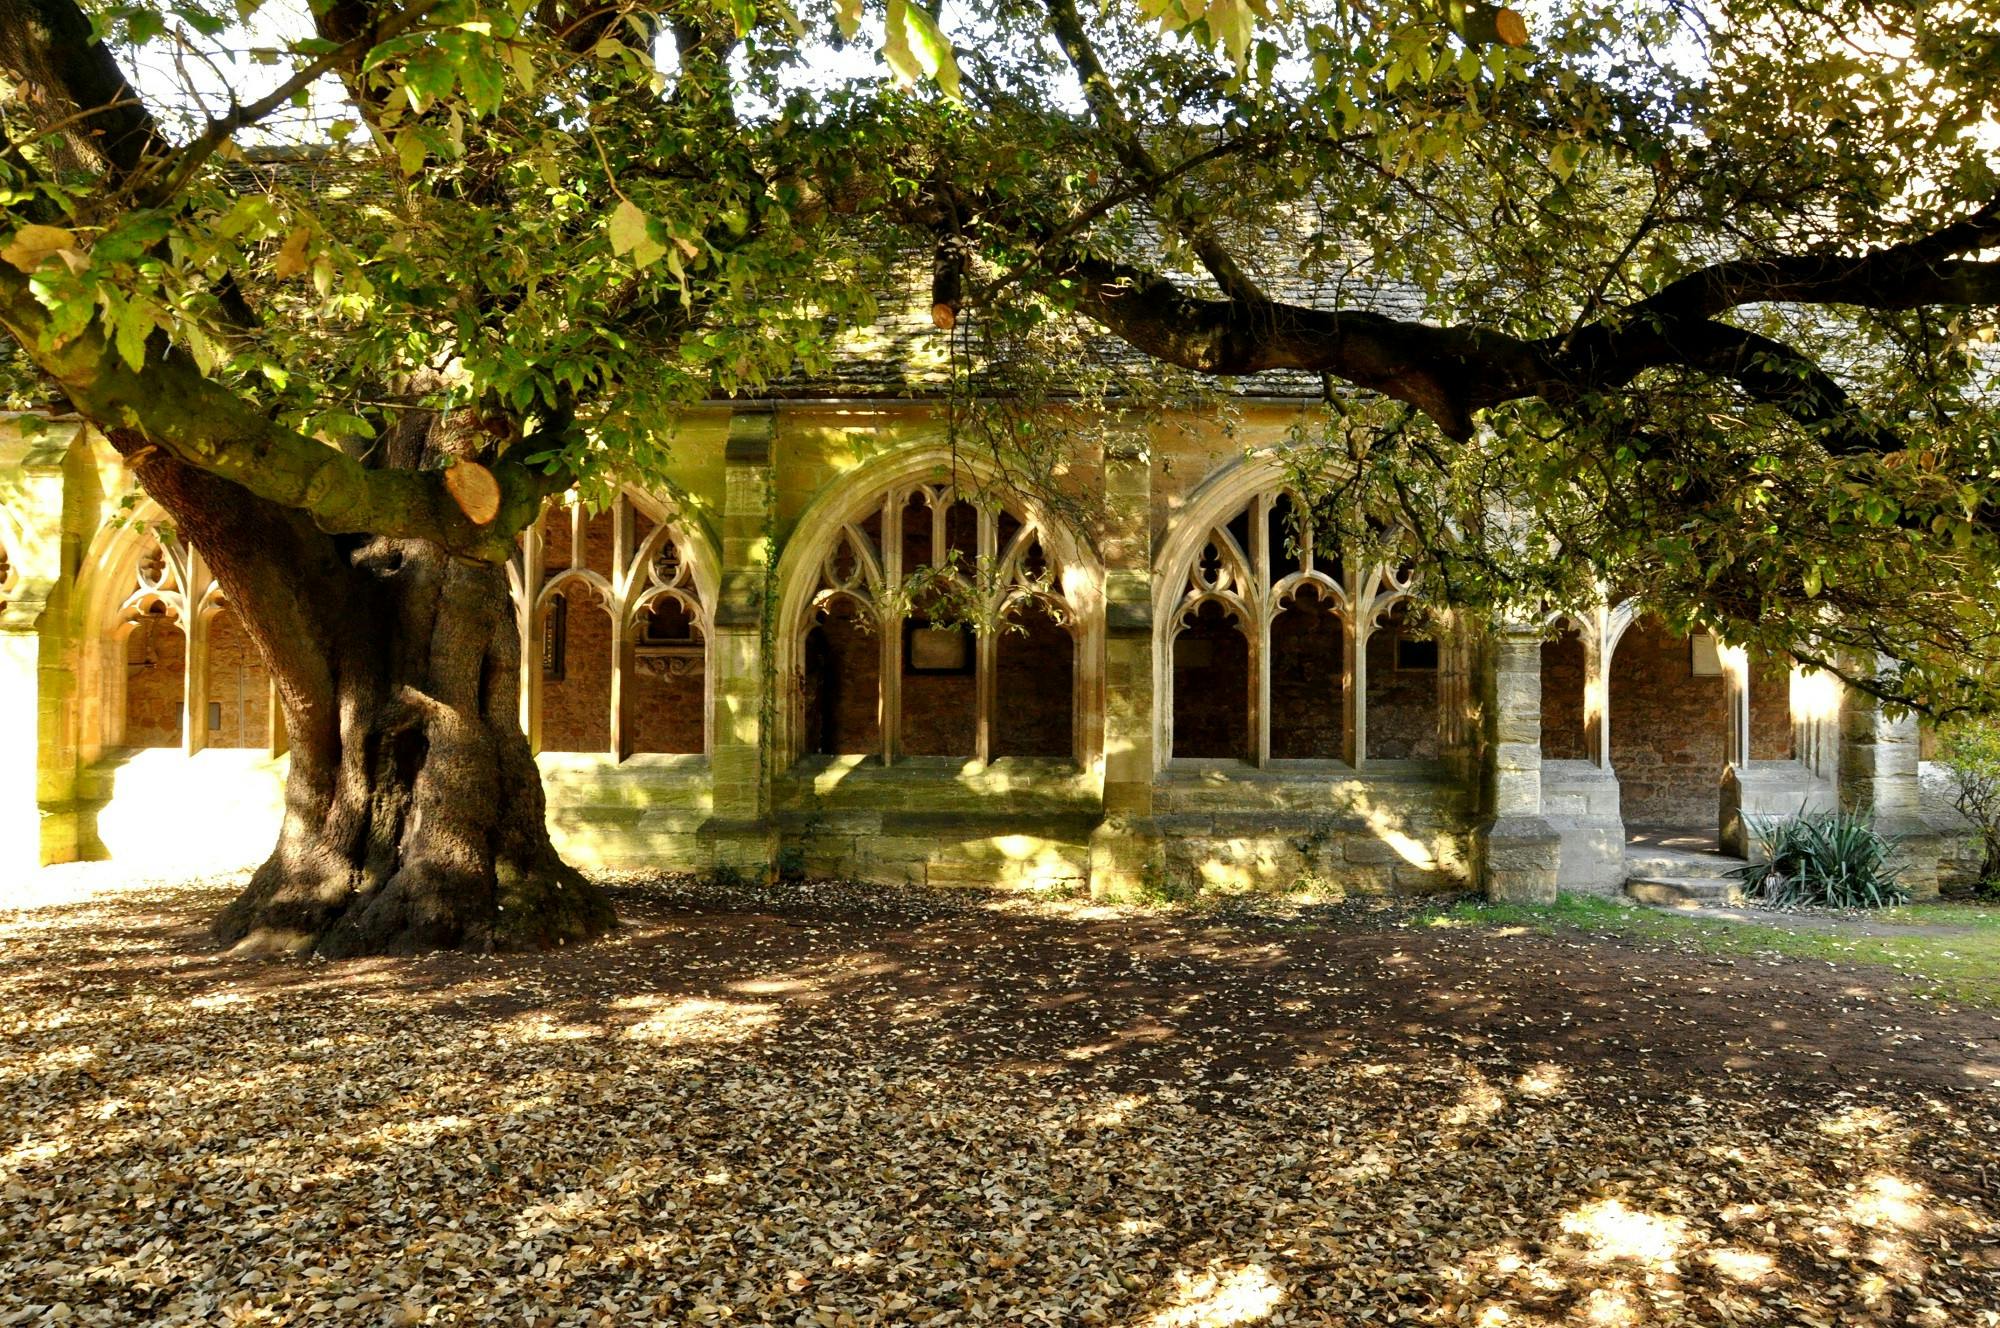 3 New College Cloisters With Tree.jpg